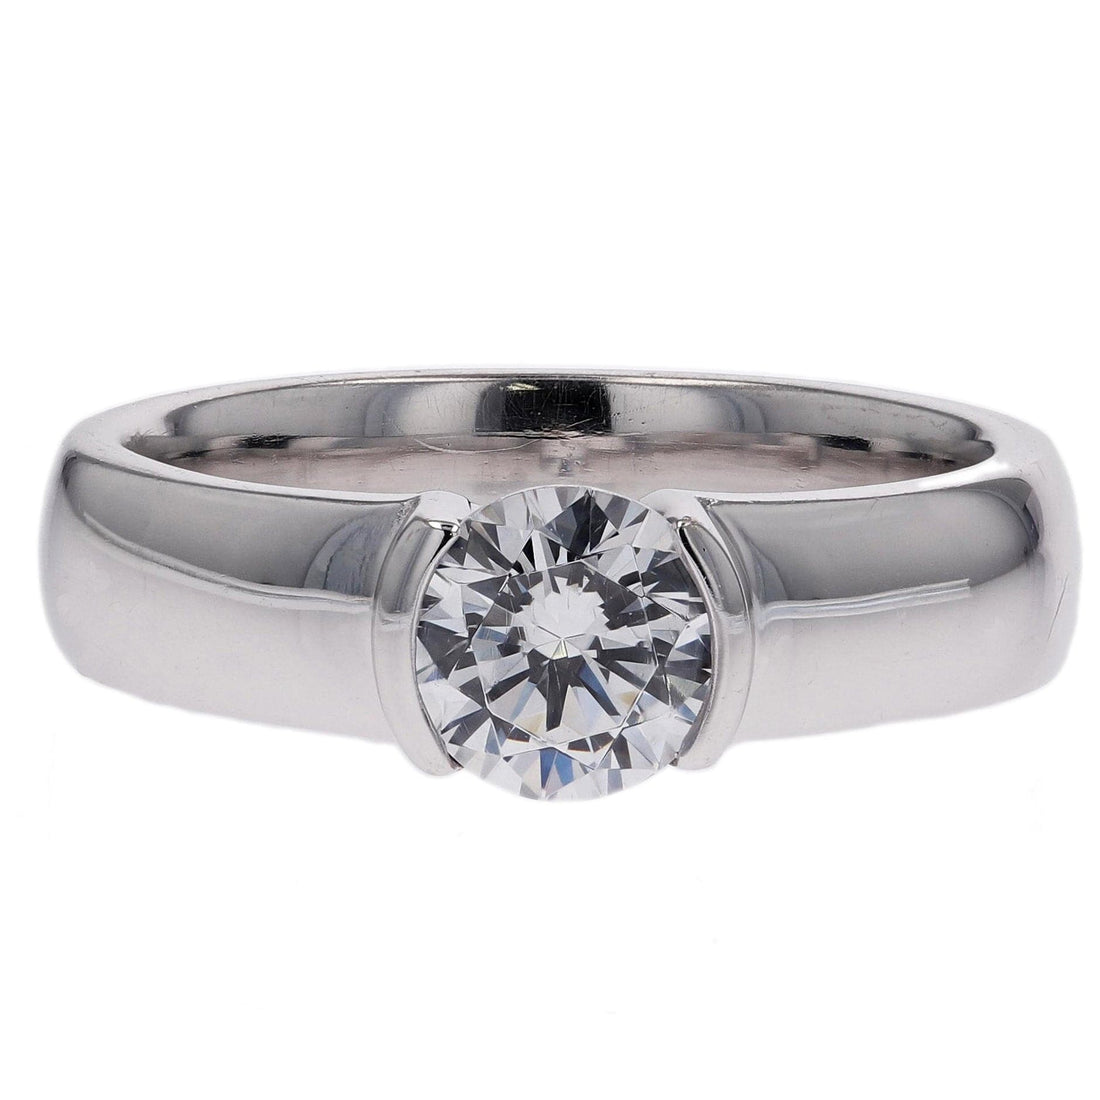 18K White Gold Semi Bezel Solitaire Engagement Rinf - Skeie's Jewelers